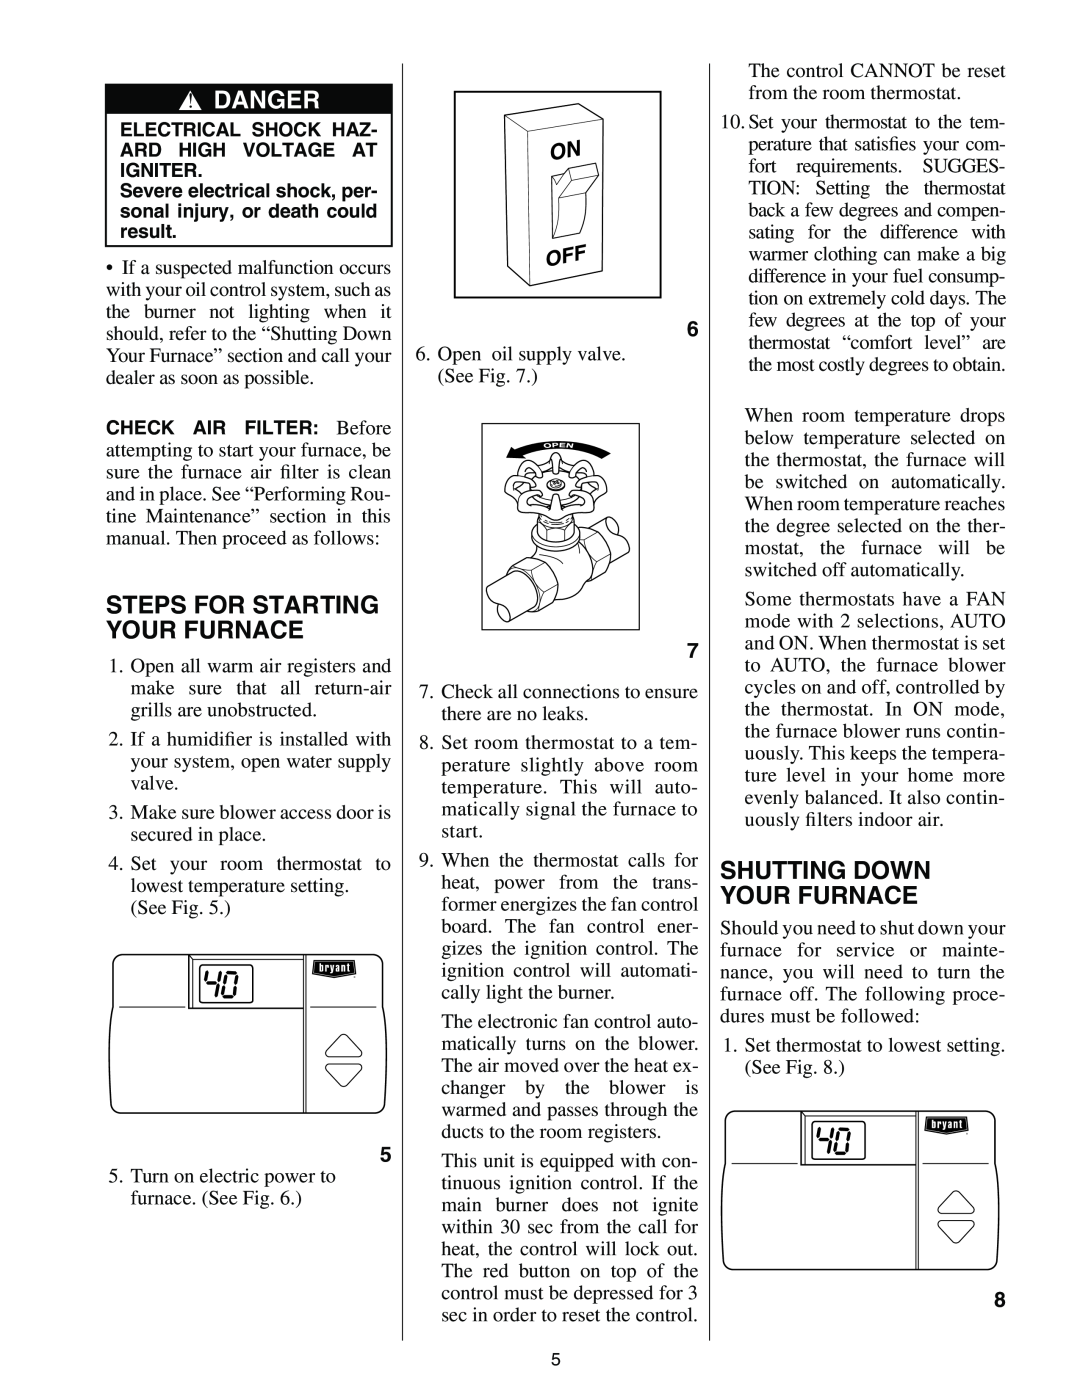 Bryant 374RAN manual Shutting Down Your Furnace, Steps For Starting Your Furnace, Danger 